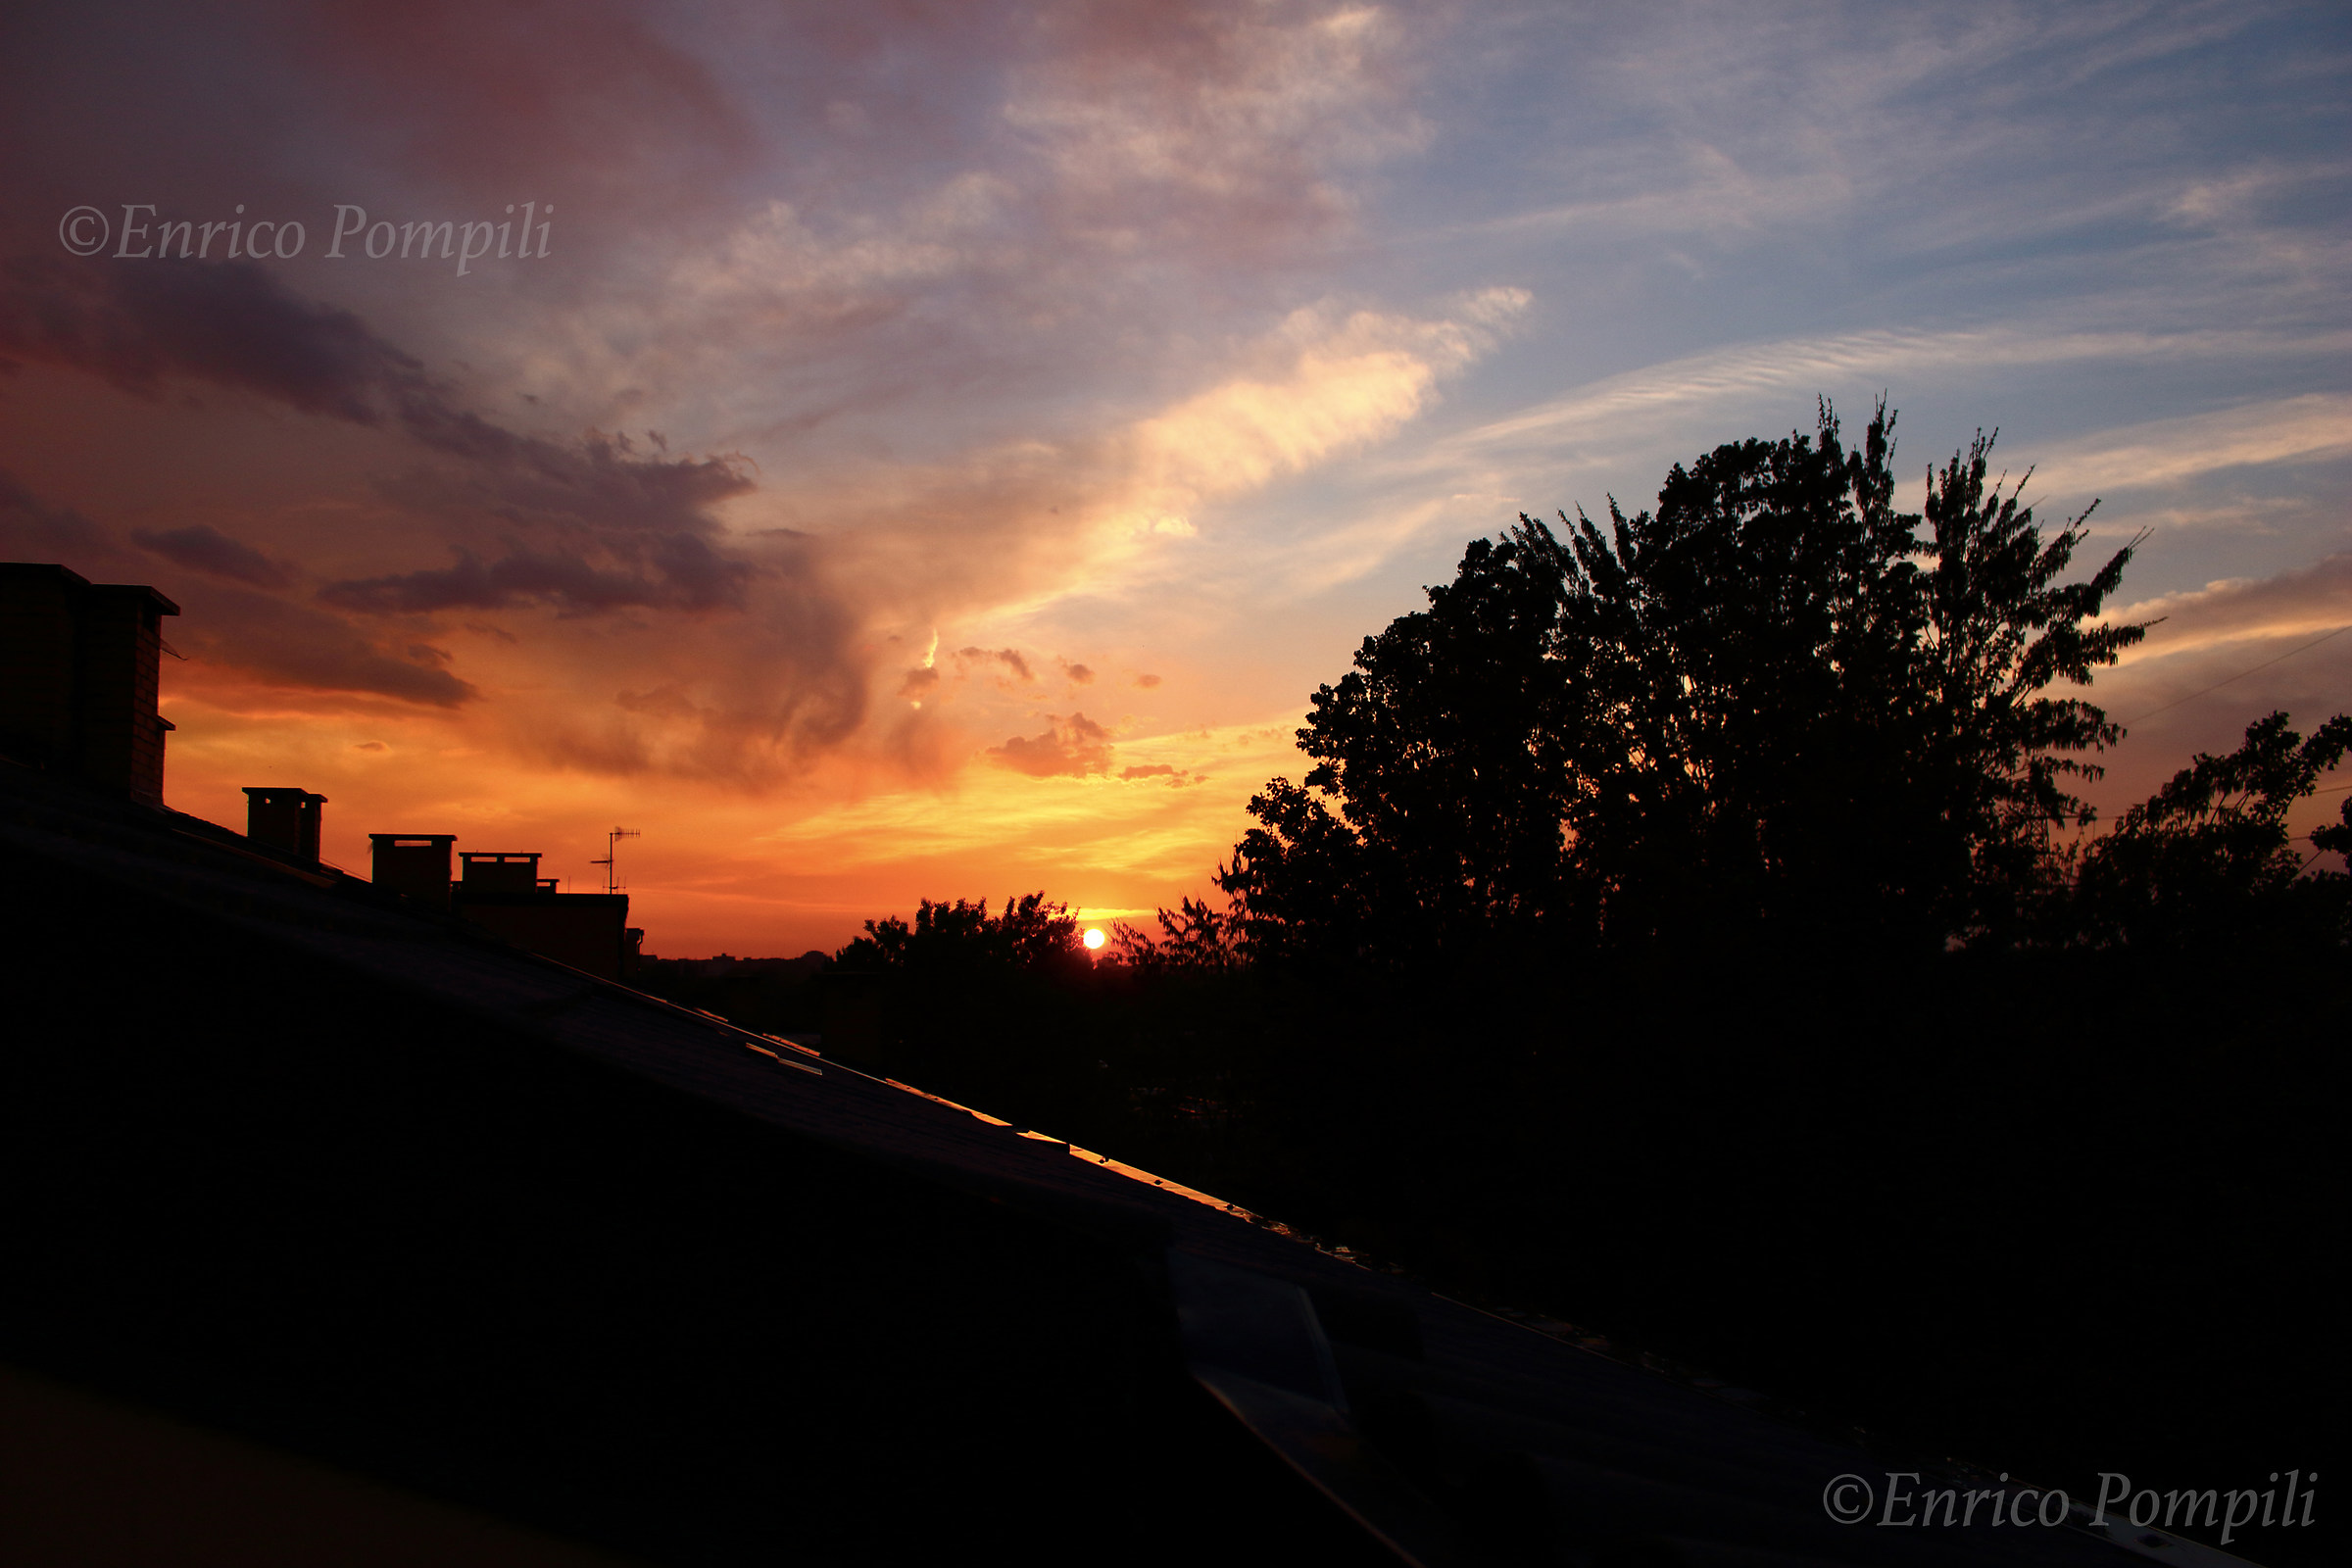 Sunset on the roofs...